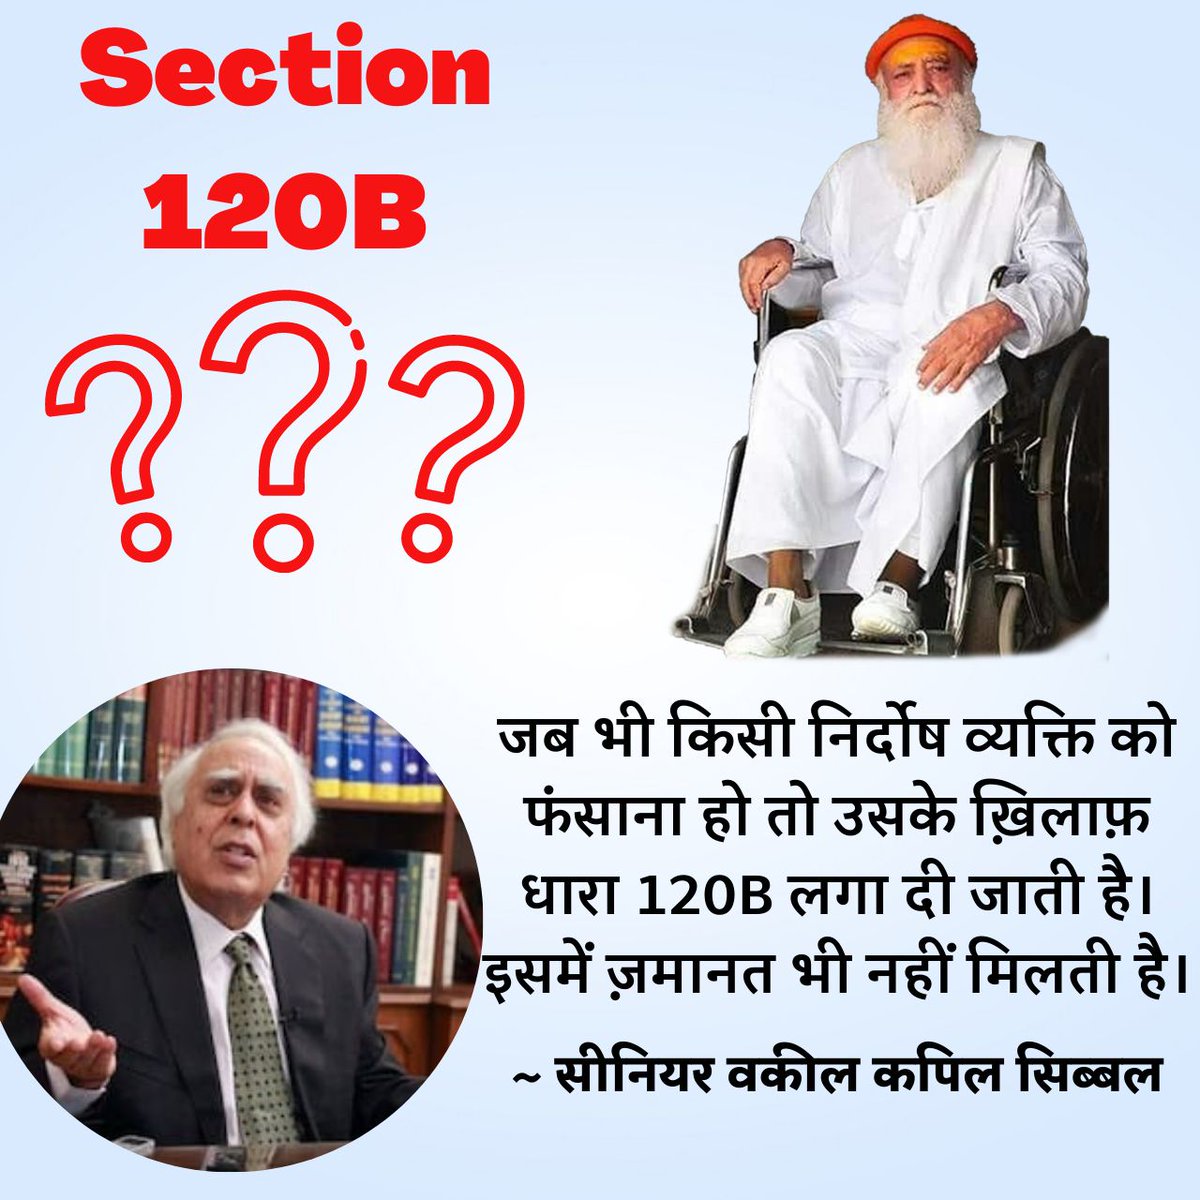 Legal experts say that Section 120B has been misused in Asaram Bapu Ji's case. Bapuji propagated Sanatan Dharma all over the world. These heretics are not liking it. #HistoryRepeated #asarambapucase #asarambapu #section120b #misuse #law #innocent #suffering #legalexpert